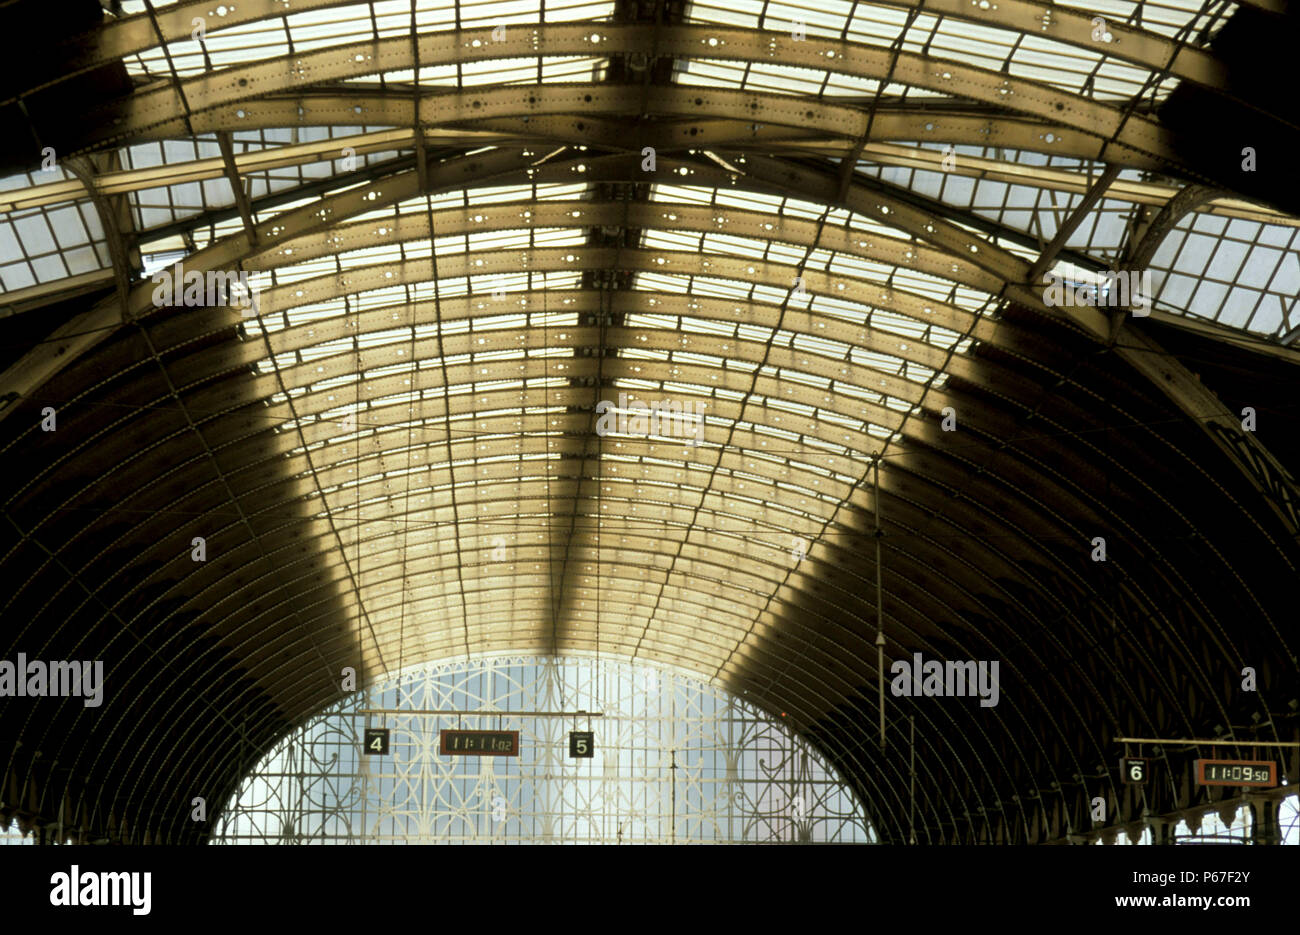 Brunel's fine trainshed roof at Paddington station in London. 2003 Stock Photo